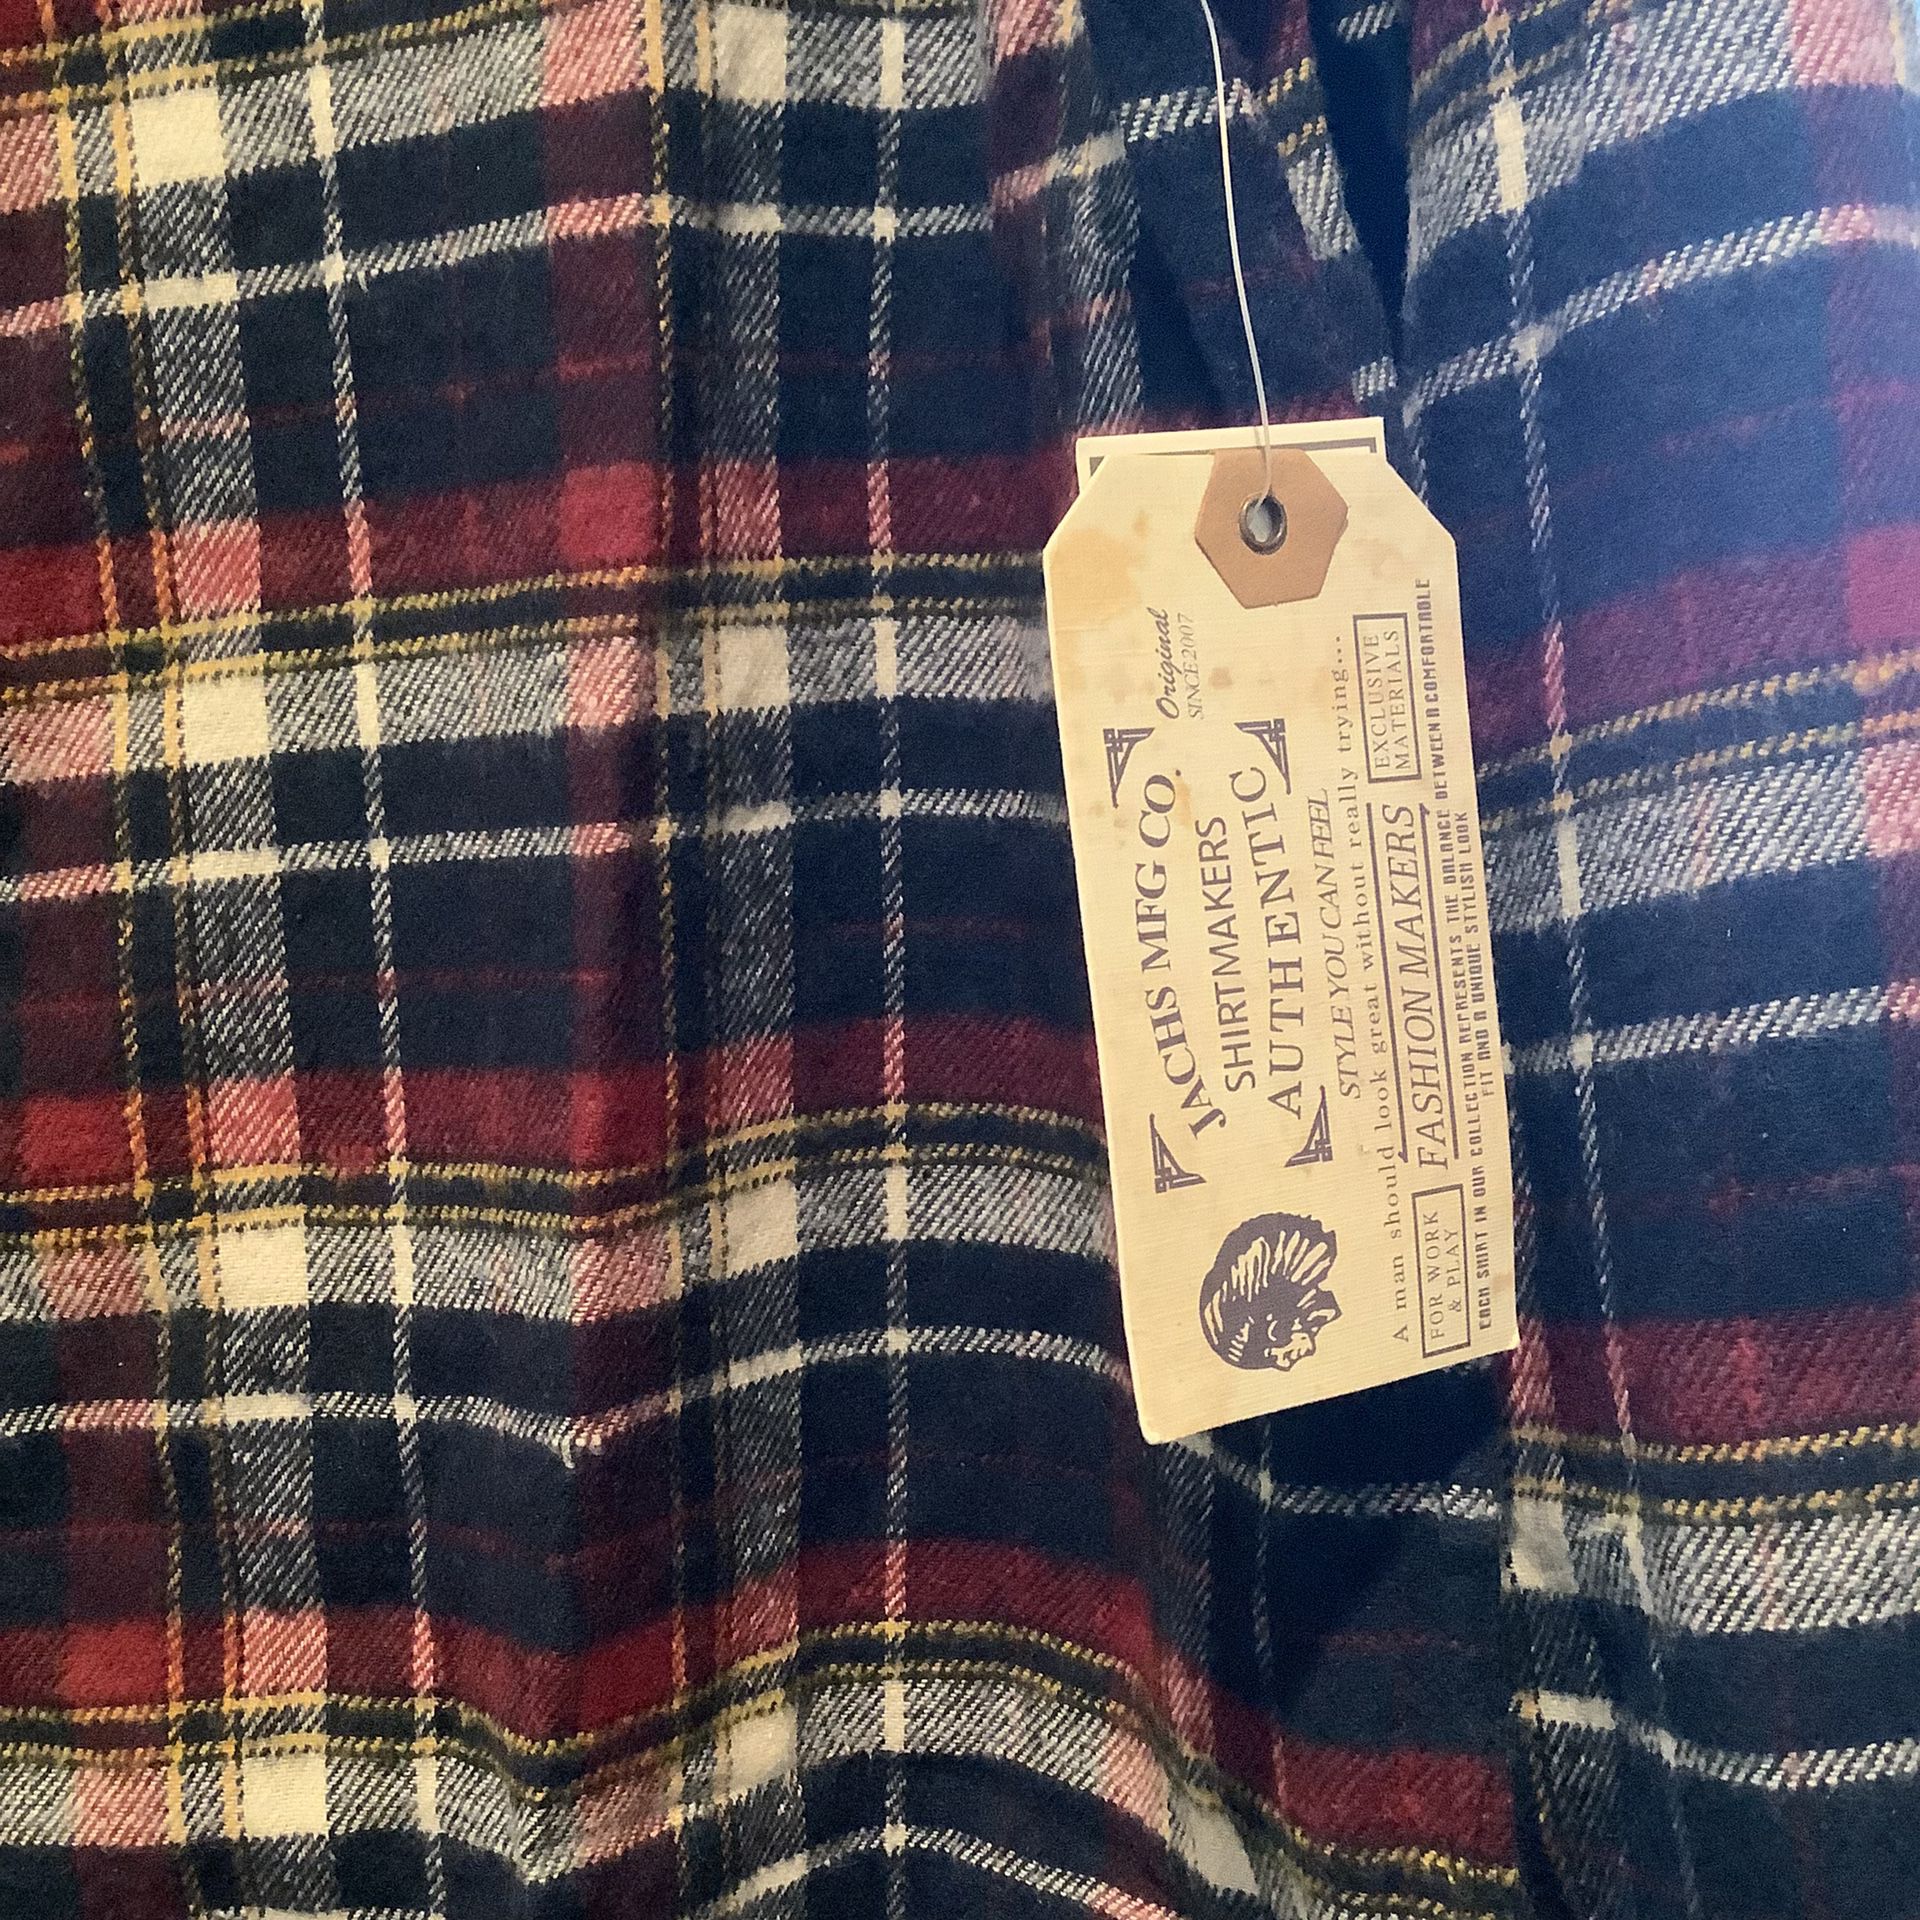 Brand new jacks mfg co company size large with tags retail 69 usd button down up shirt plaid flannel rare